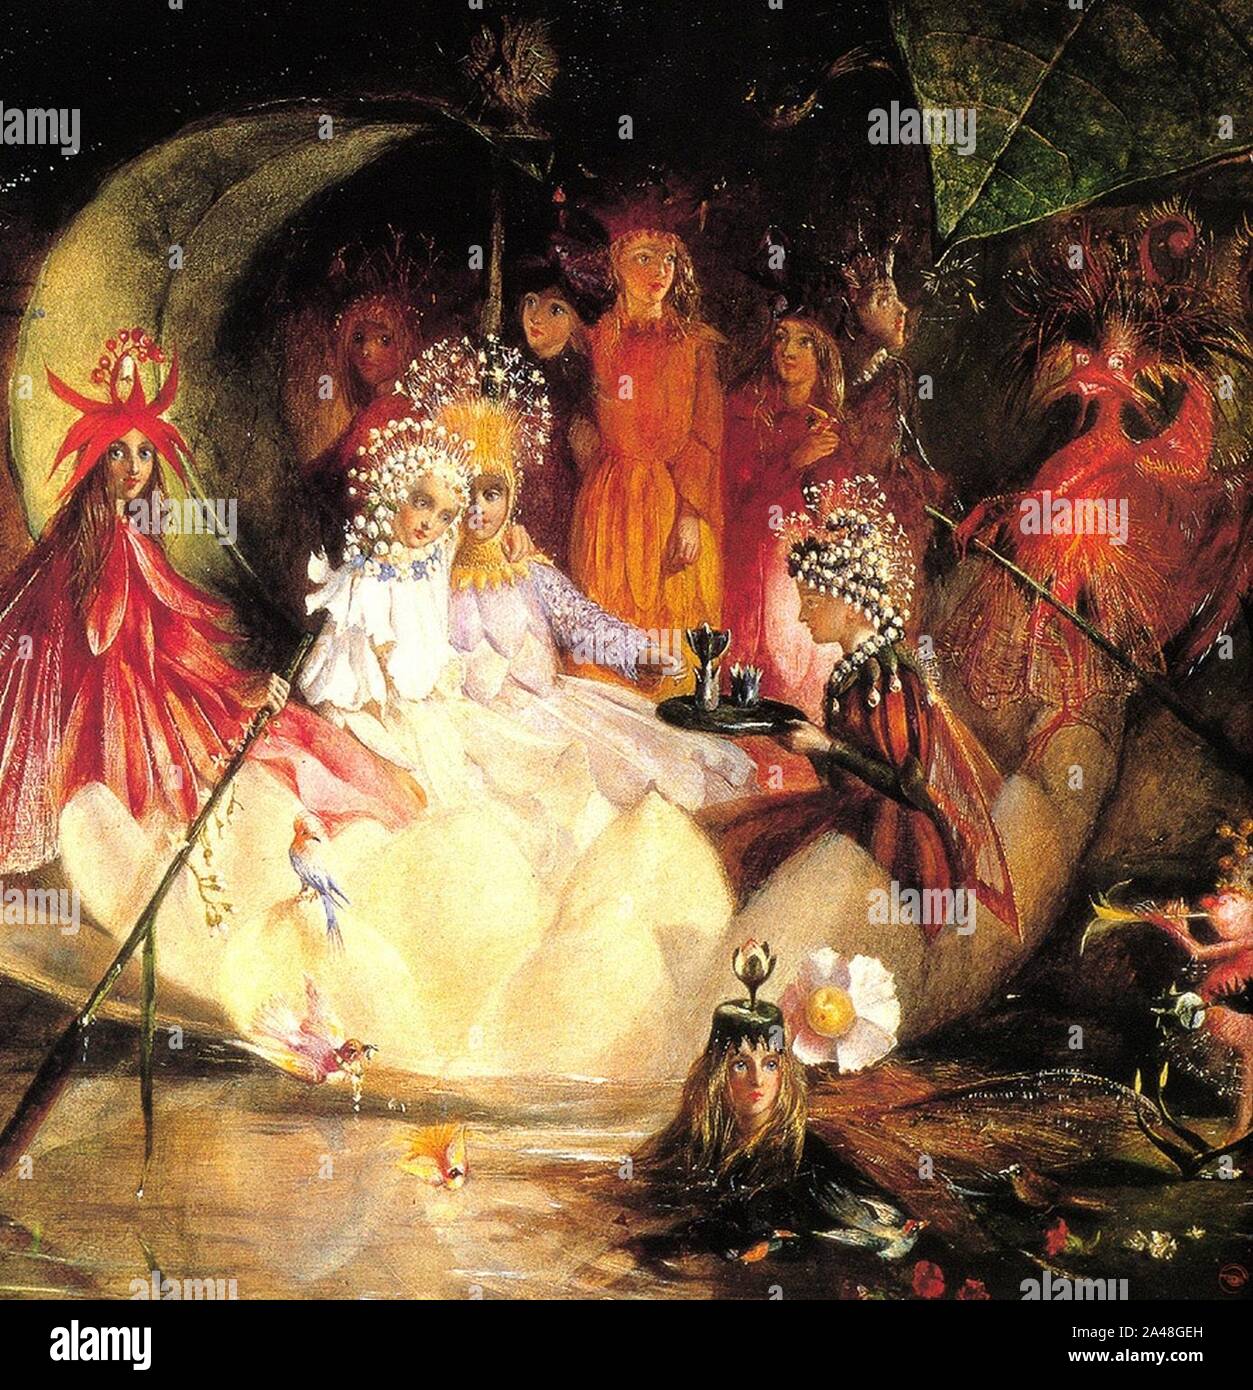 Fitzgerald, John Anster - The Marriage of Oberon and Titania. Stock Photo